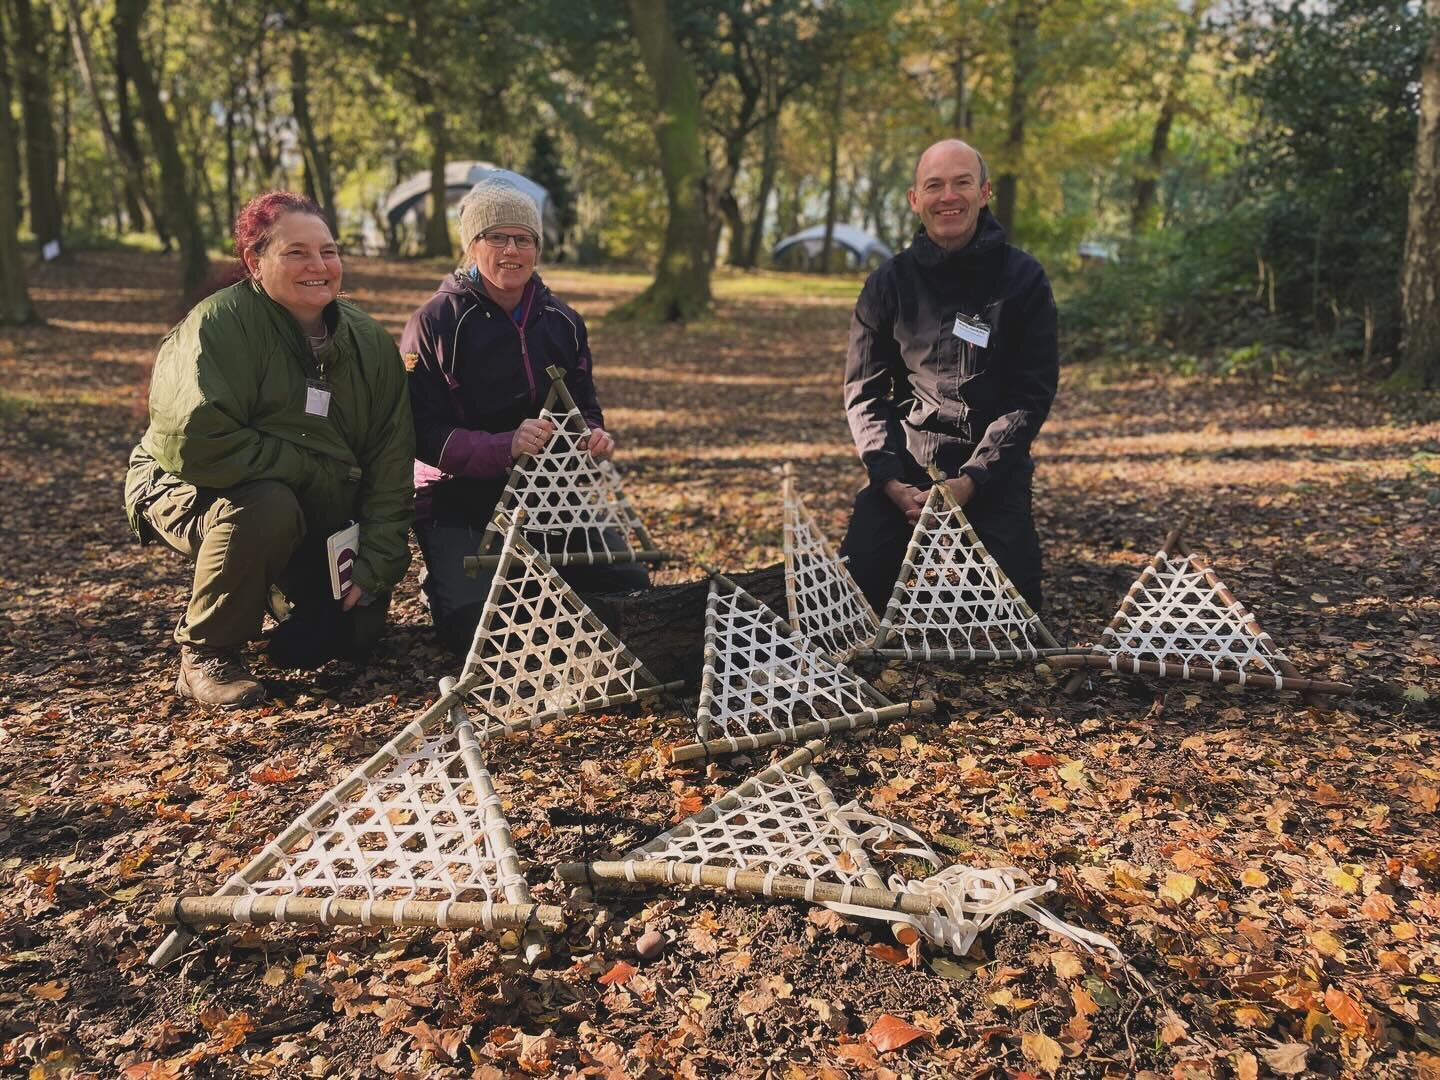 Snowshoe weaving was a really fun and new workshop for me to deliver, I think given these excellent participants all wove their own triangles within the 90 minute session hails it a success. Looking forward to running more classes for @iolbushcraftpp